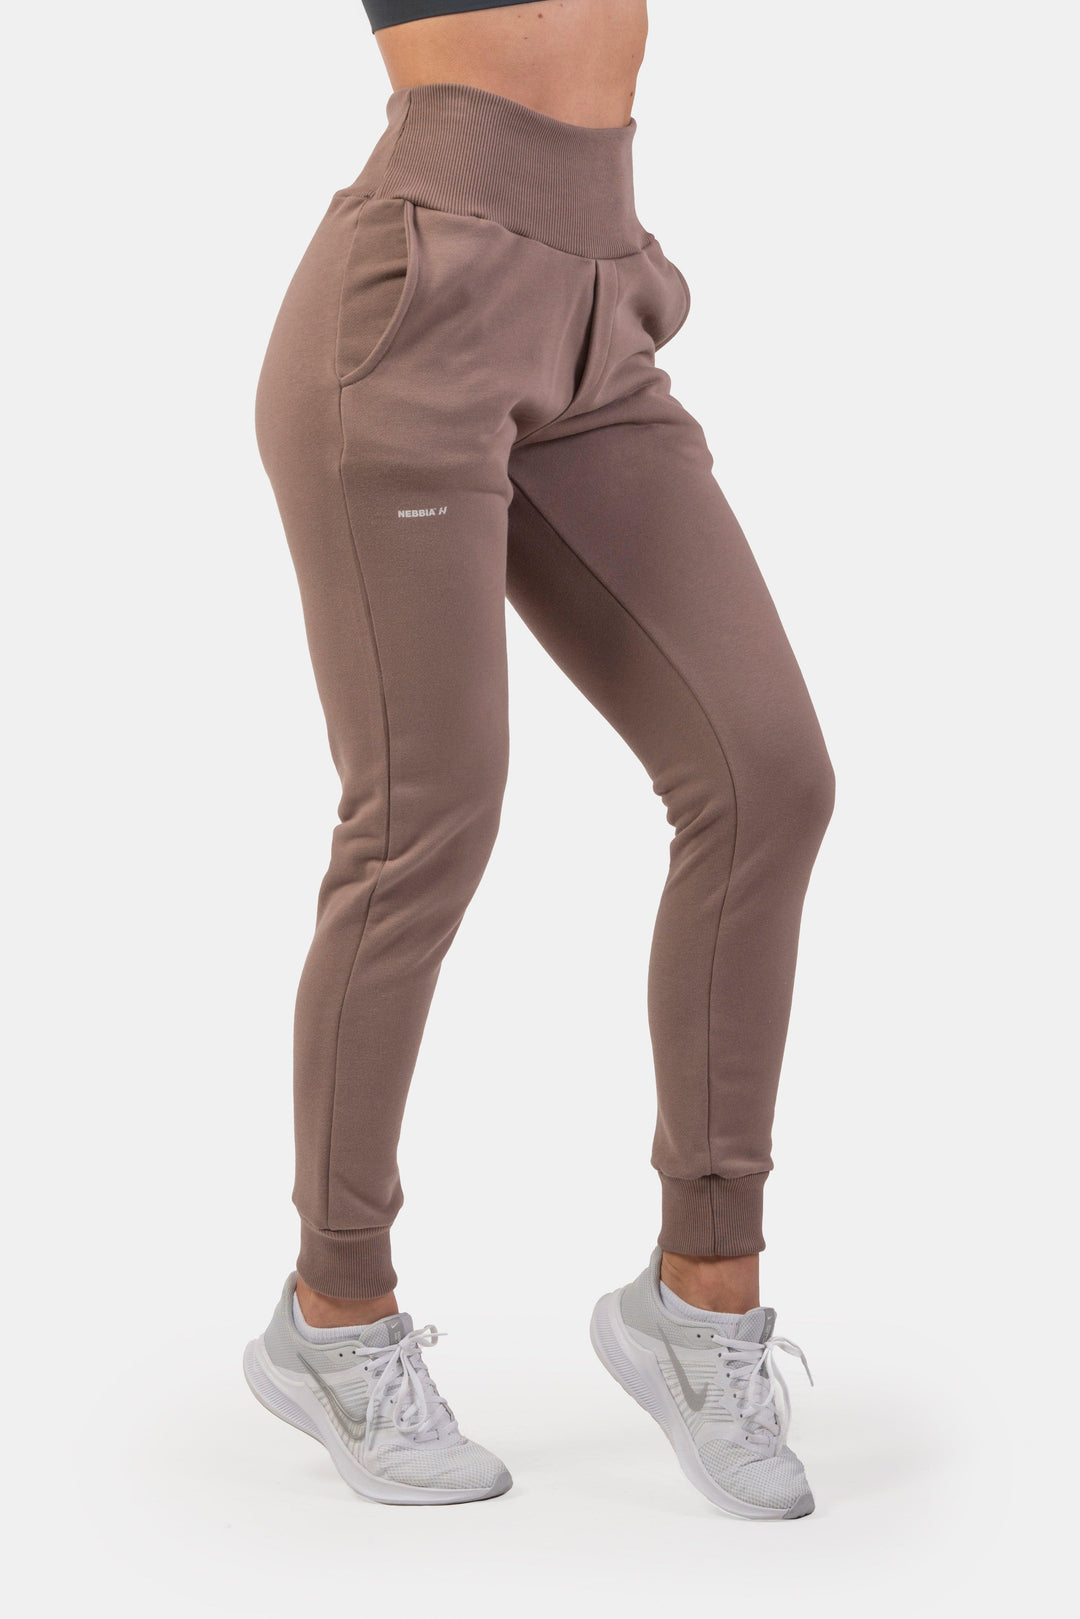 NEBBIA High-Waist Loose Fit Sweatpants "Feeling Good" - Brown / XS - fitgrade.ch